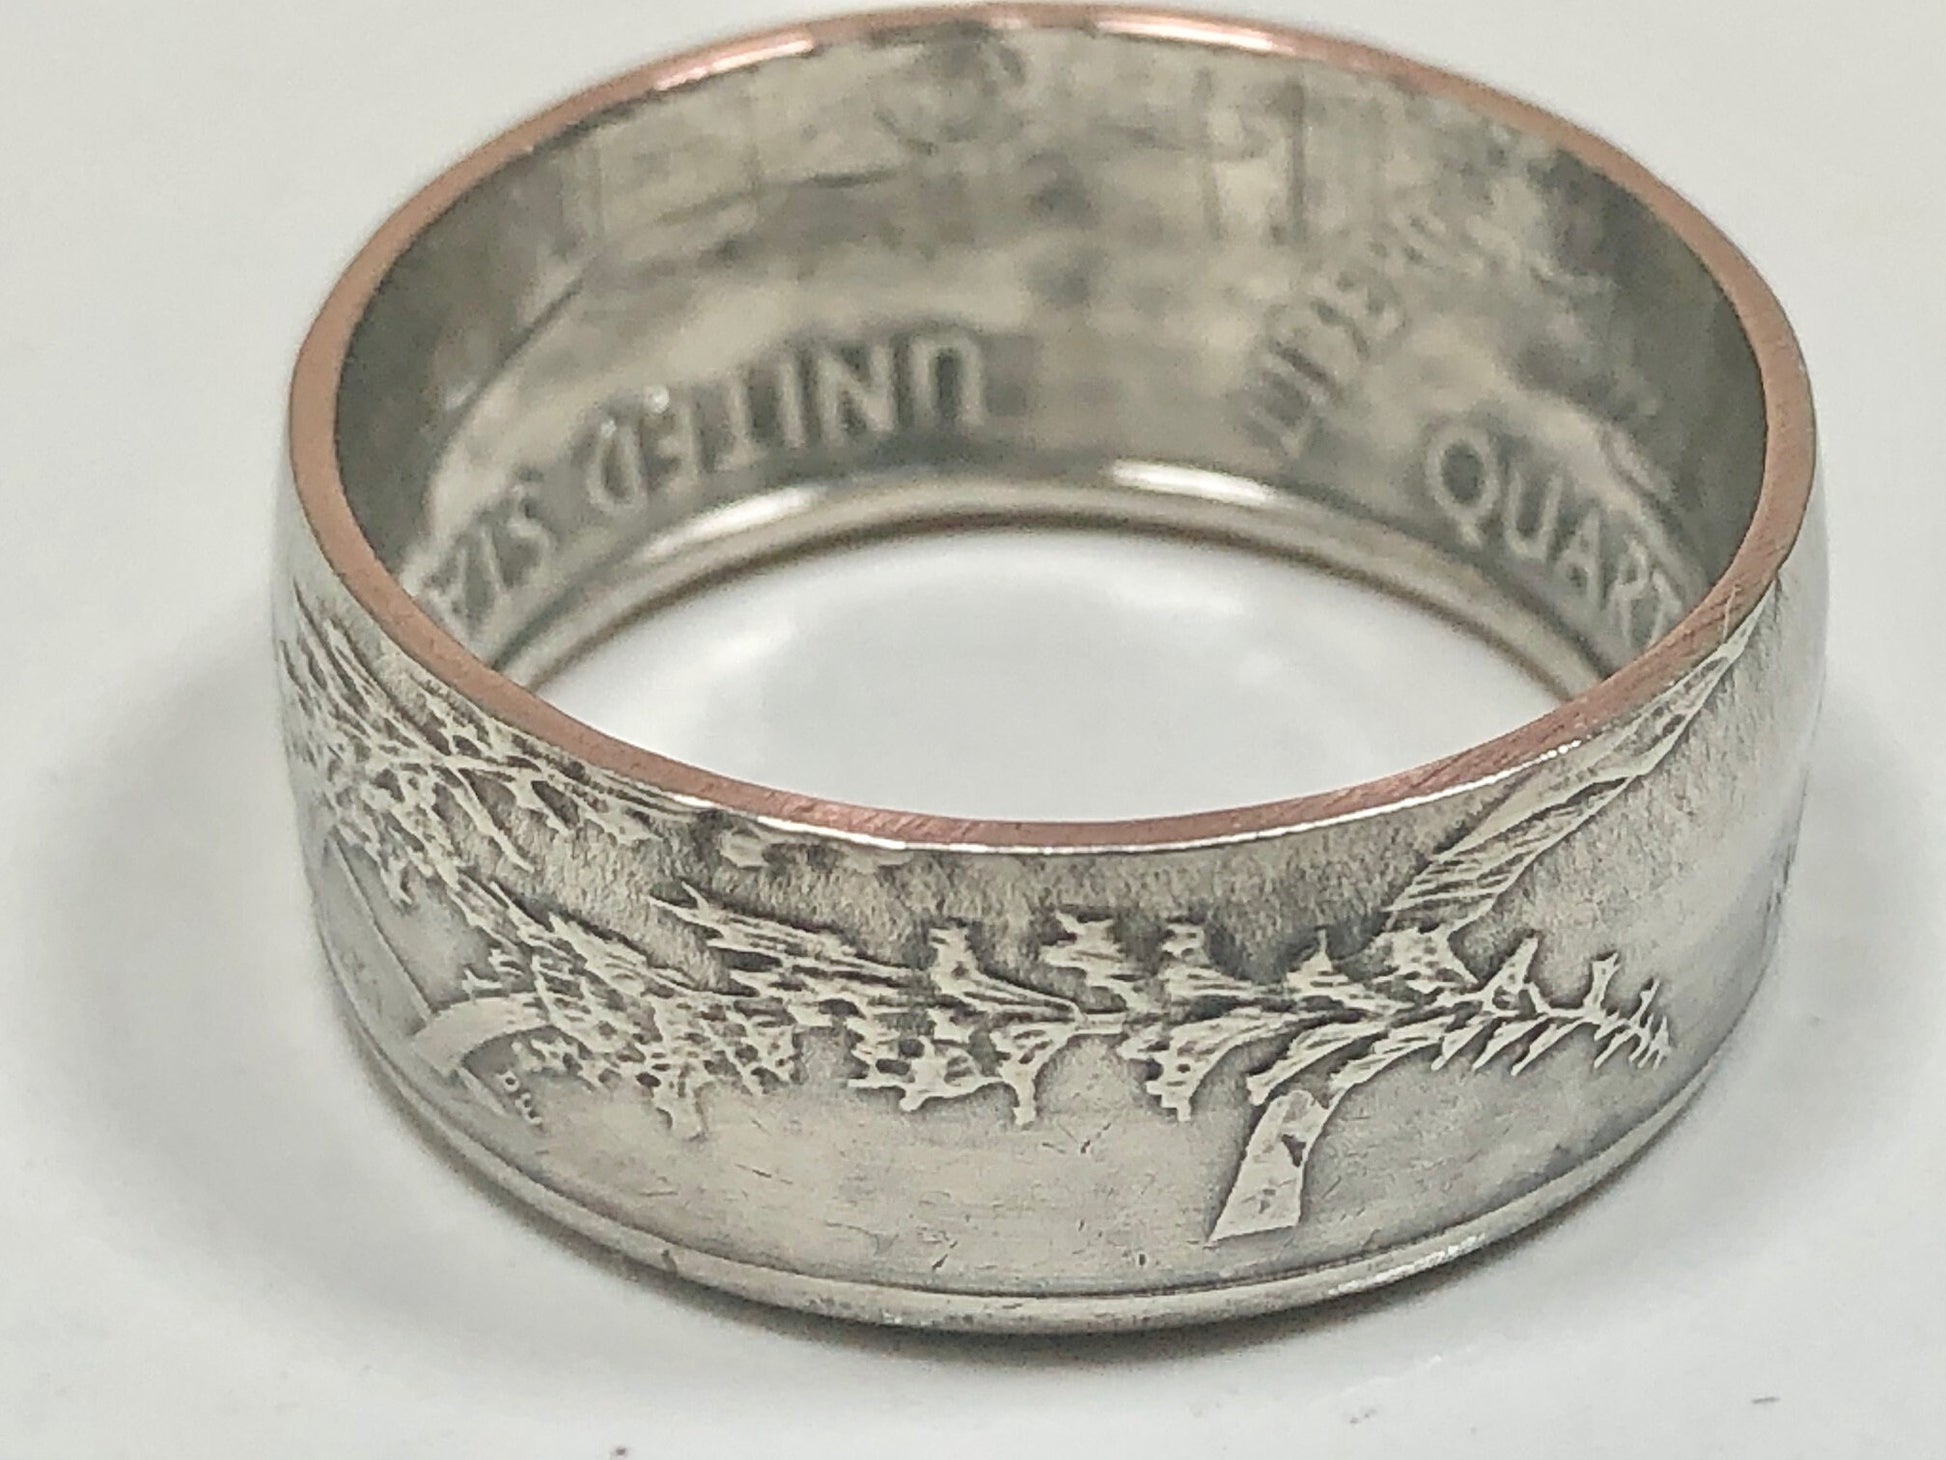 Oregon Ring State Quarter Coin Ring - Hand Made